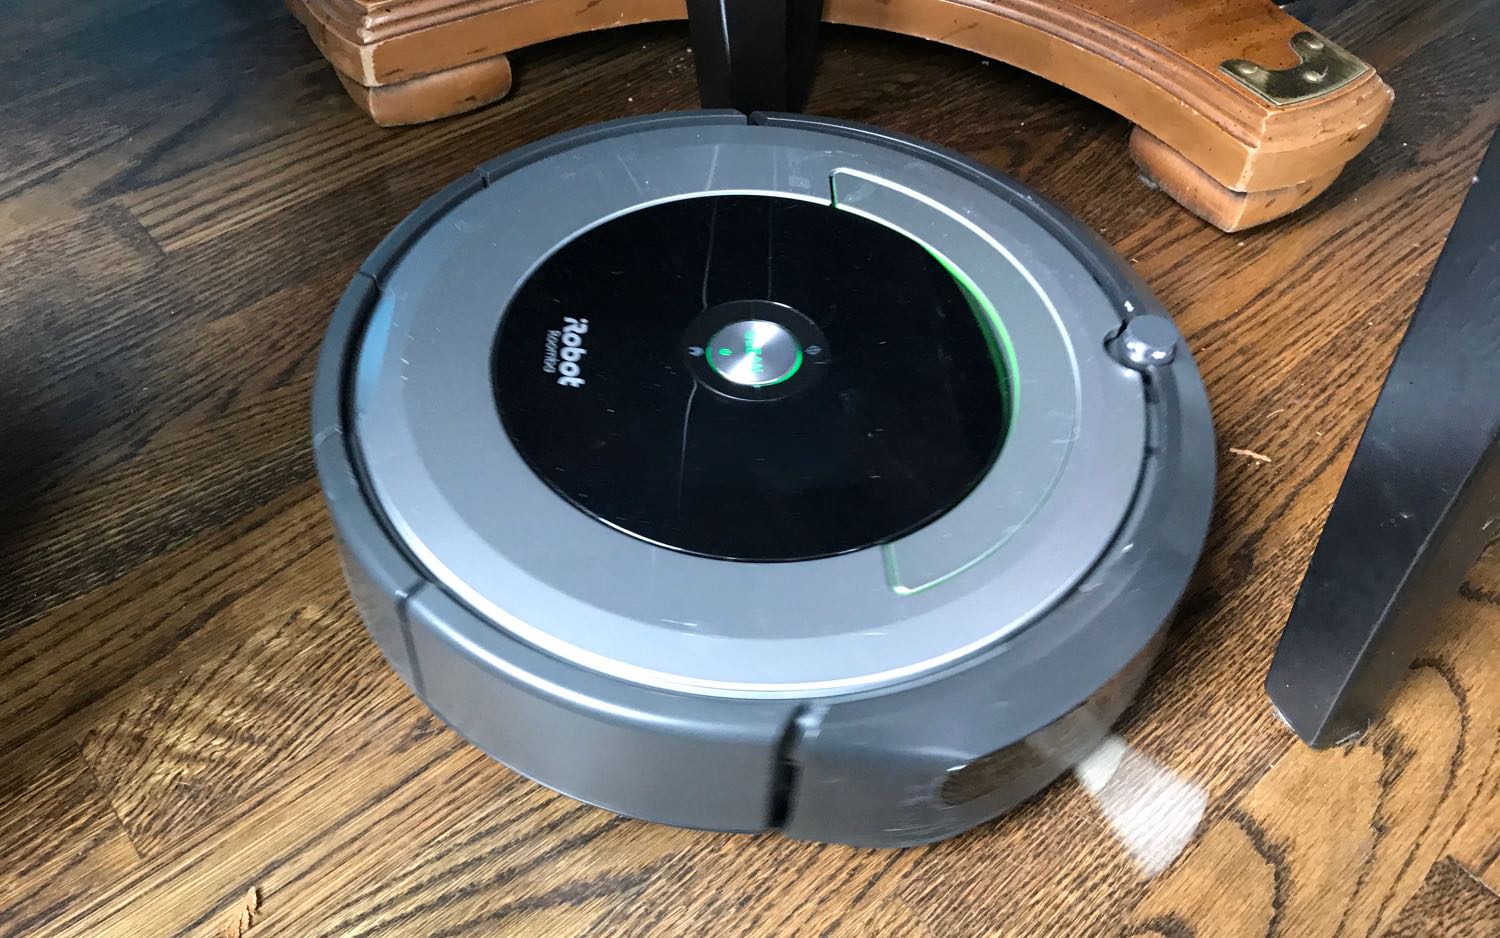 iRobot Roomba 690 Review: Impressively Clean for Under $500